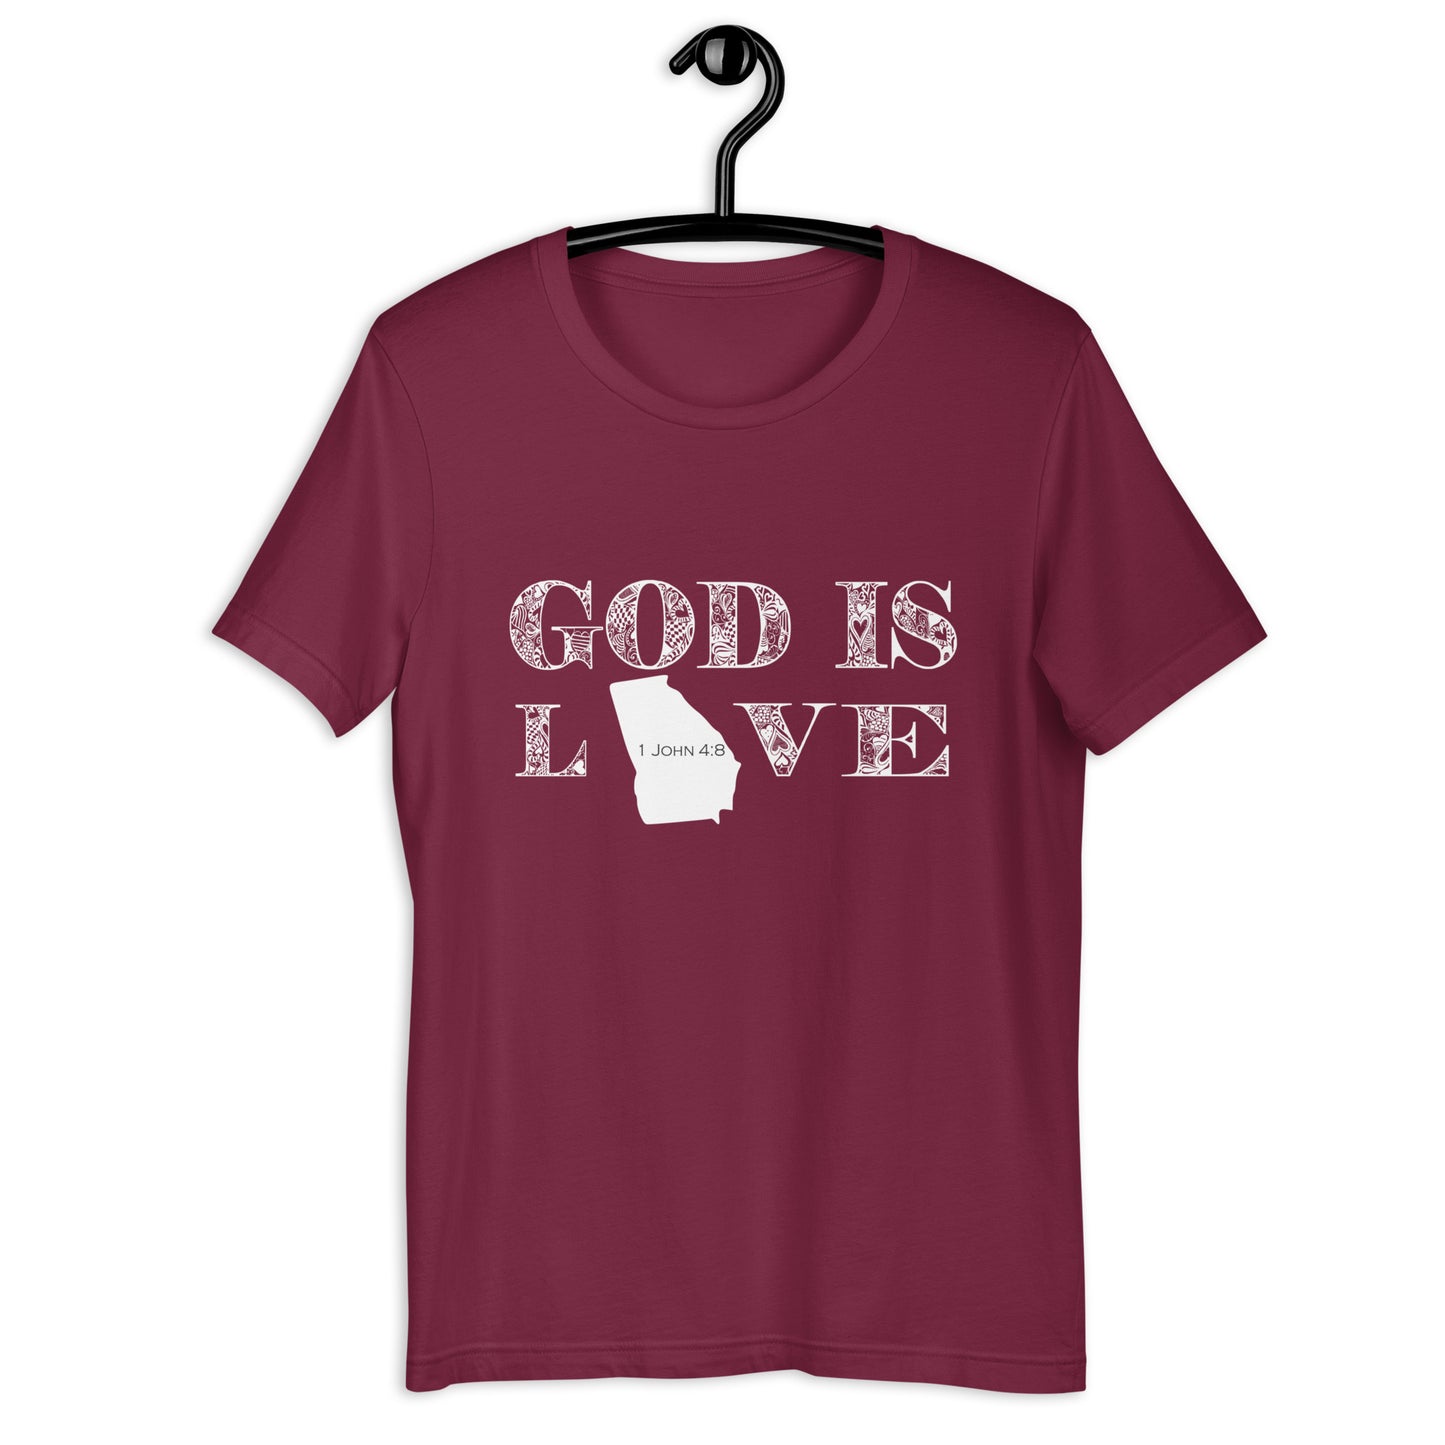 1 John 4:8 God is love Georgia T-shirt in Maroon - on hanger front view